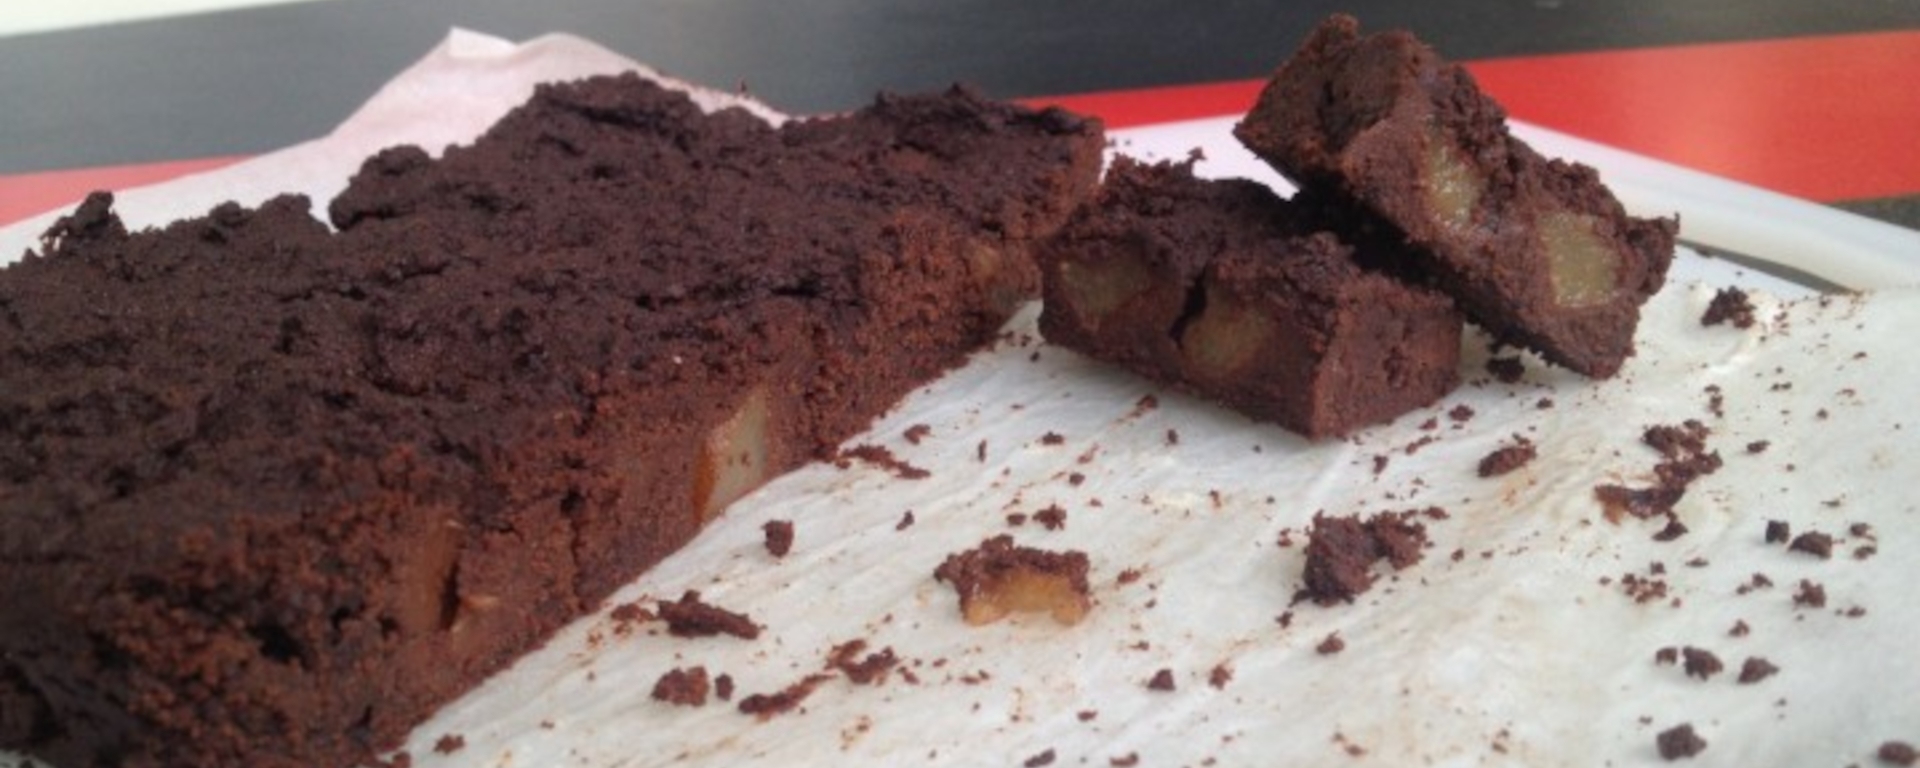 LuvMyRecipe.com - Chocolate and Pear Brownies Featured